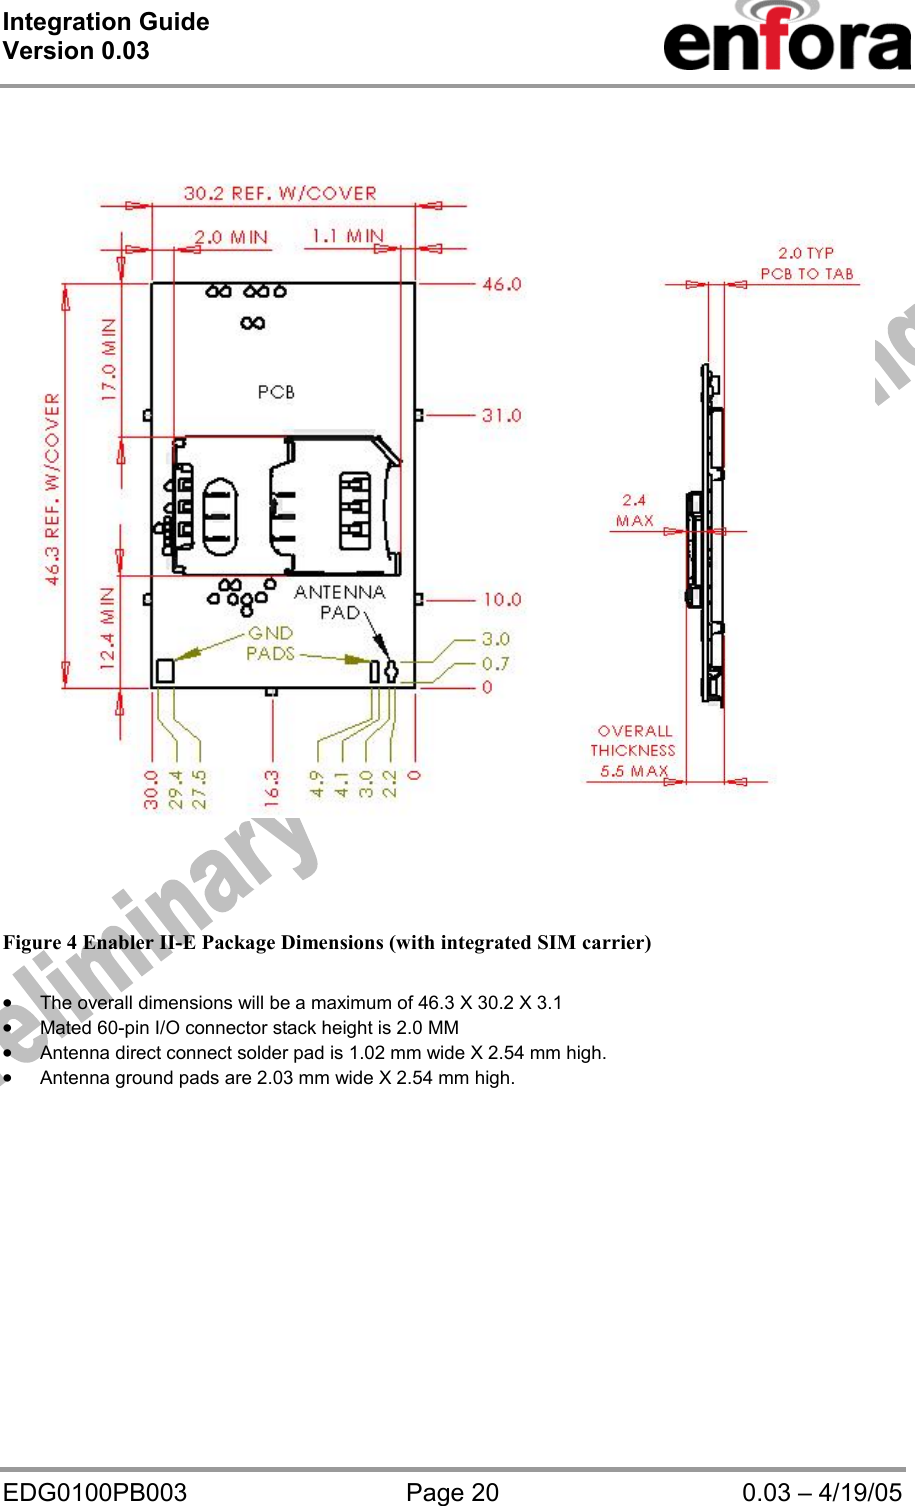 Integration Guide  Version 0.03   EDG0100PB003  Page 20  0.03 – 4/19/05         Figure 4 Enabler II-E Package Dimensions (with integrated SIM carrier)  • The overall dimensions will be a maximum of 46.3 X 30.2 X 3.1 • Mated 60-pin I/O connector stack height is 2.0 MM • Antenna direct connect solder pad is 1.02 mm wide X 2.54 mm high. • Antenna ground pads are 2.03 mm wide X 2.54 mm high.    